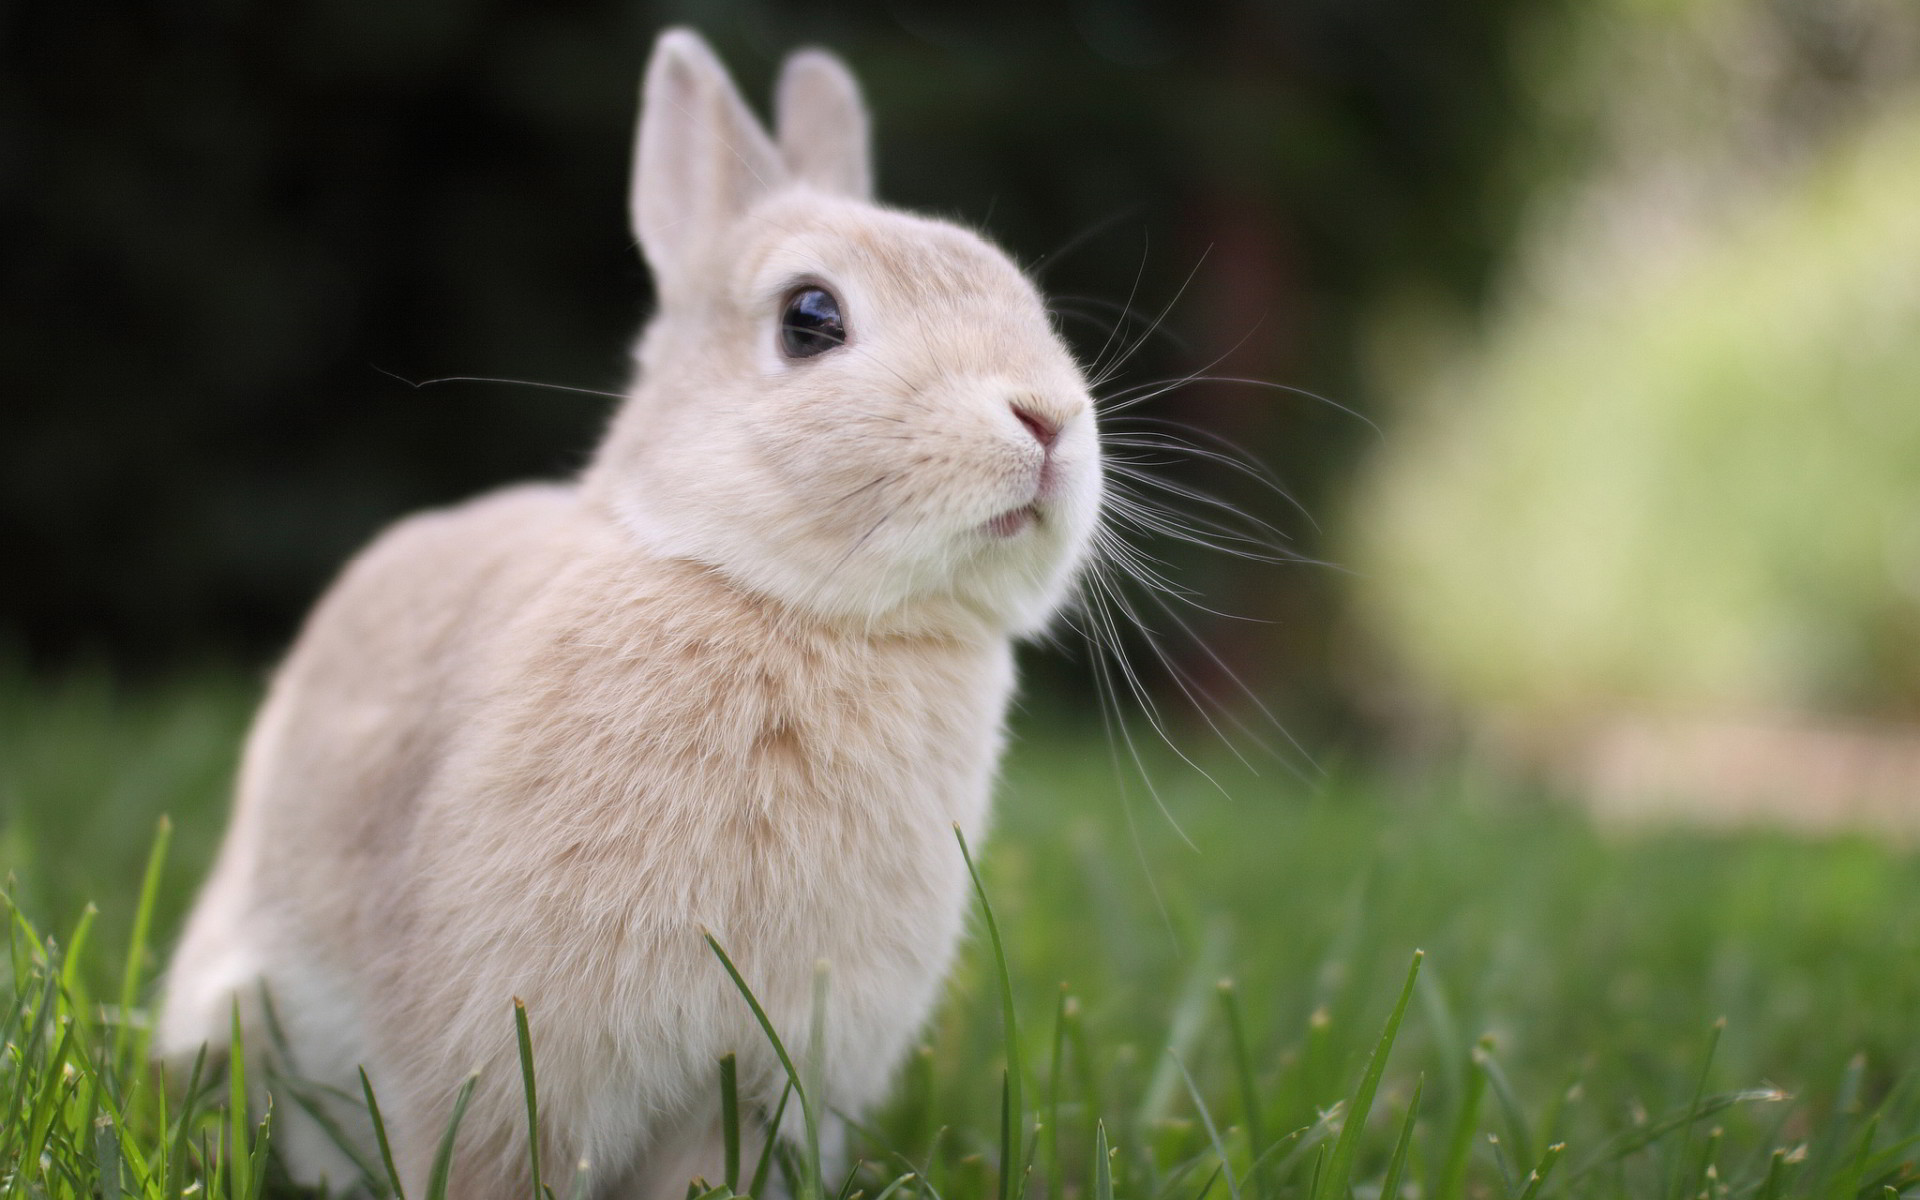 Animals Wallpaper: Cute Bunny Wallpapers Free with HD Desktop